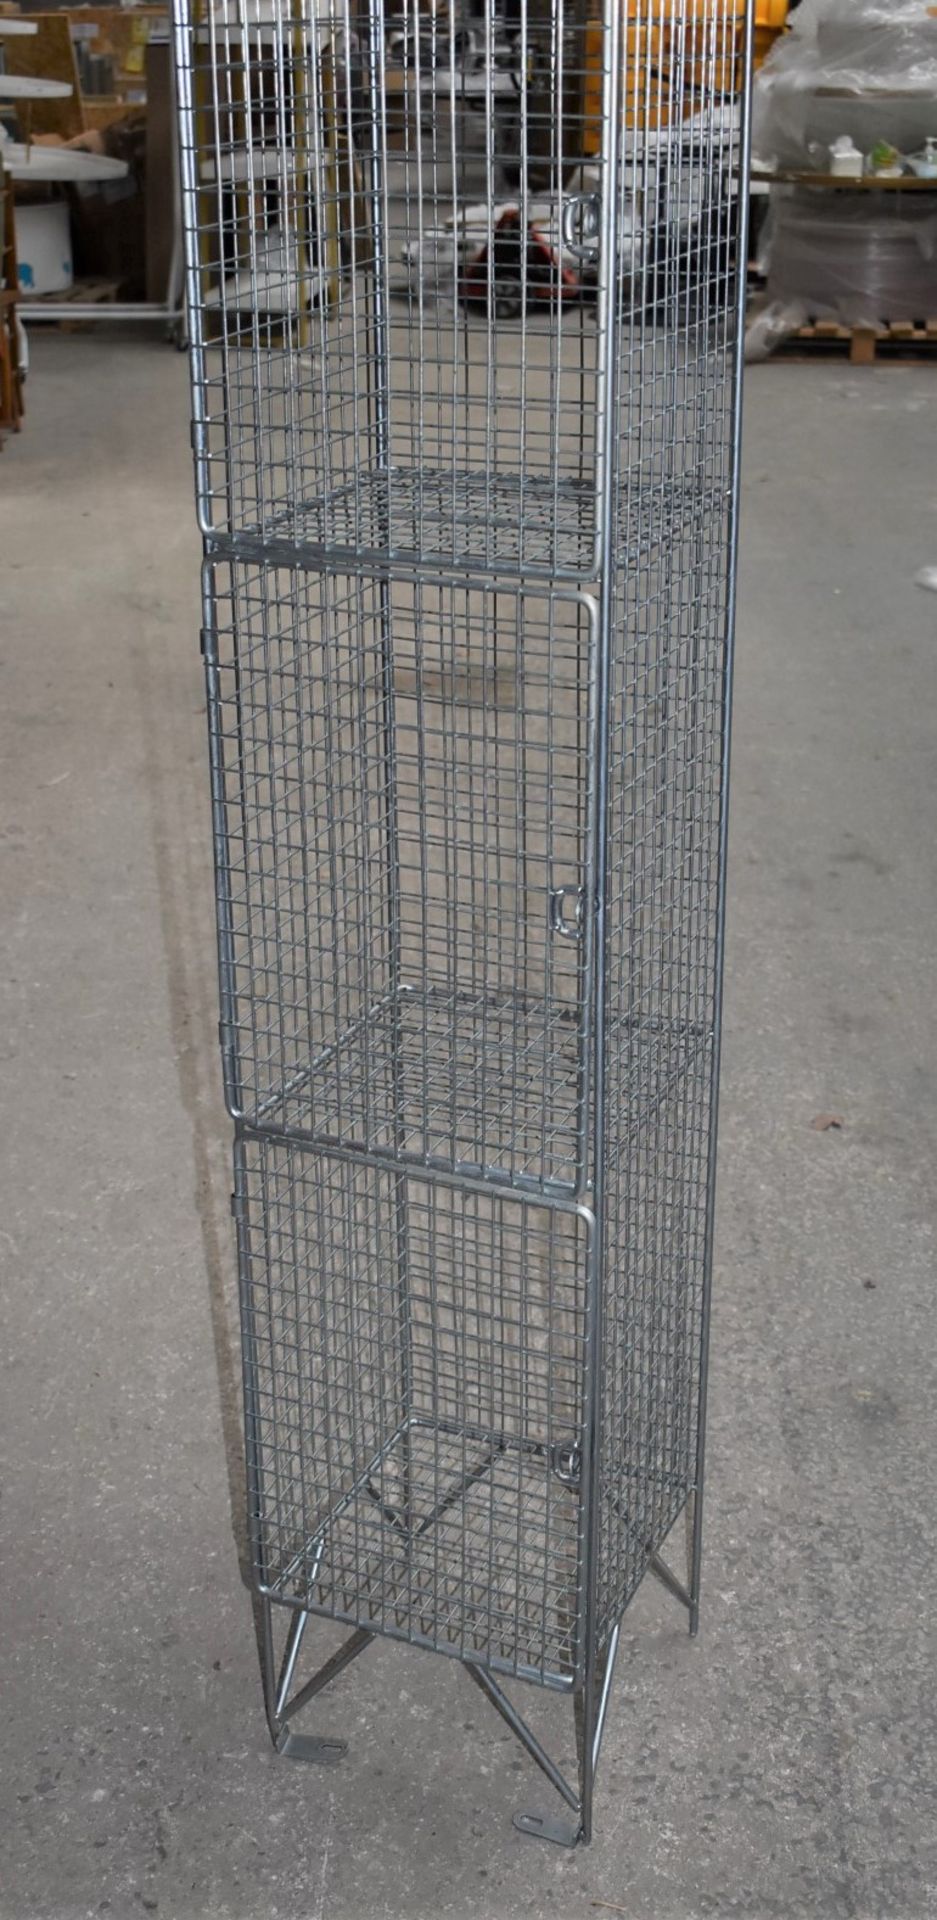 1 x Wire Mesh Cage Lockers With Four Locker Compartments - Dimensions: H193 x W30 x D32 cms - Ref: - Image 2 of 11